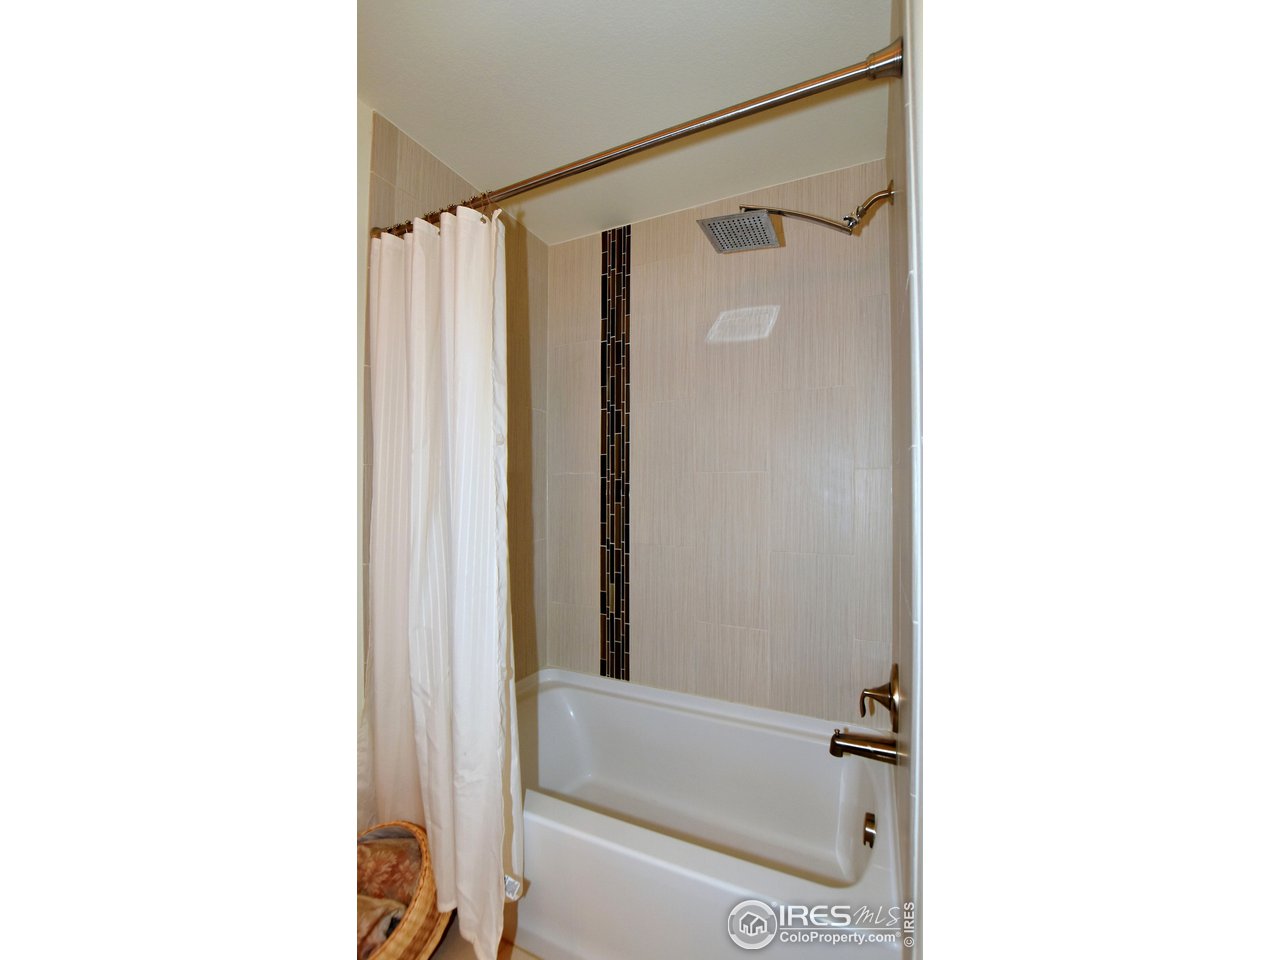 Owner's Suite Tub/Shower with Rain Shower Head